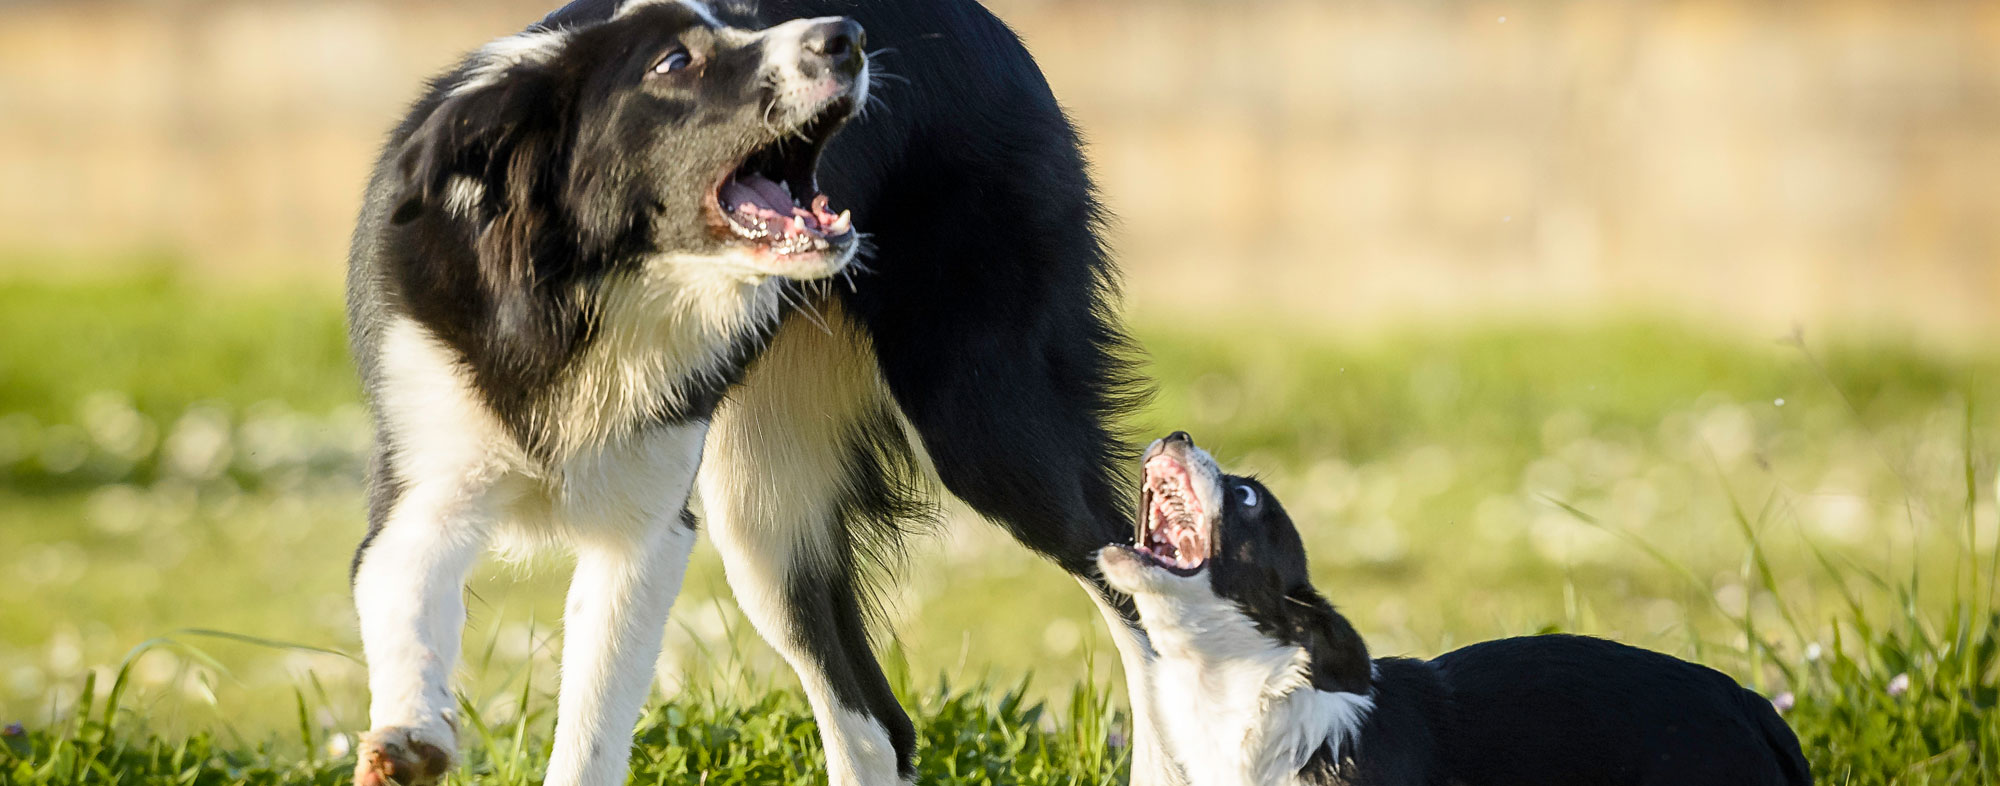 Dogs have varying personality traits, just like human beings